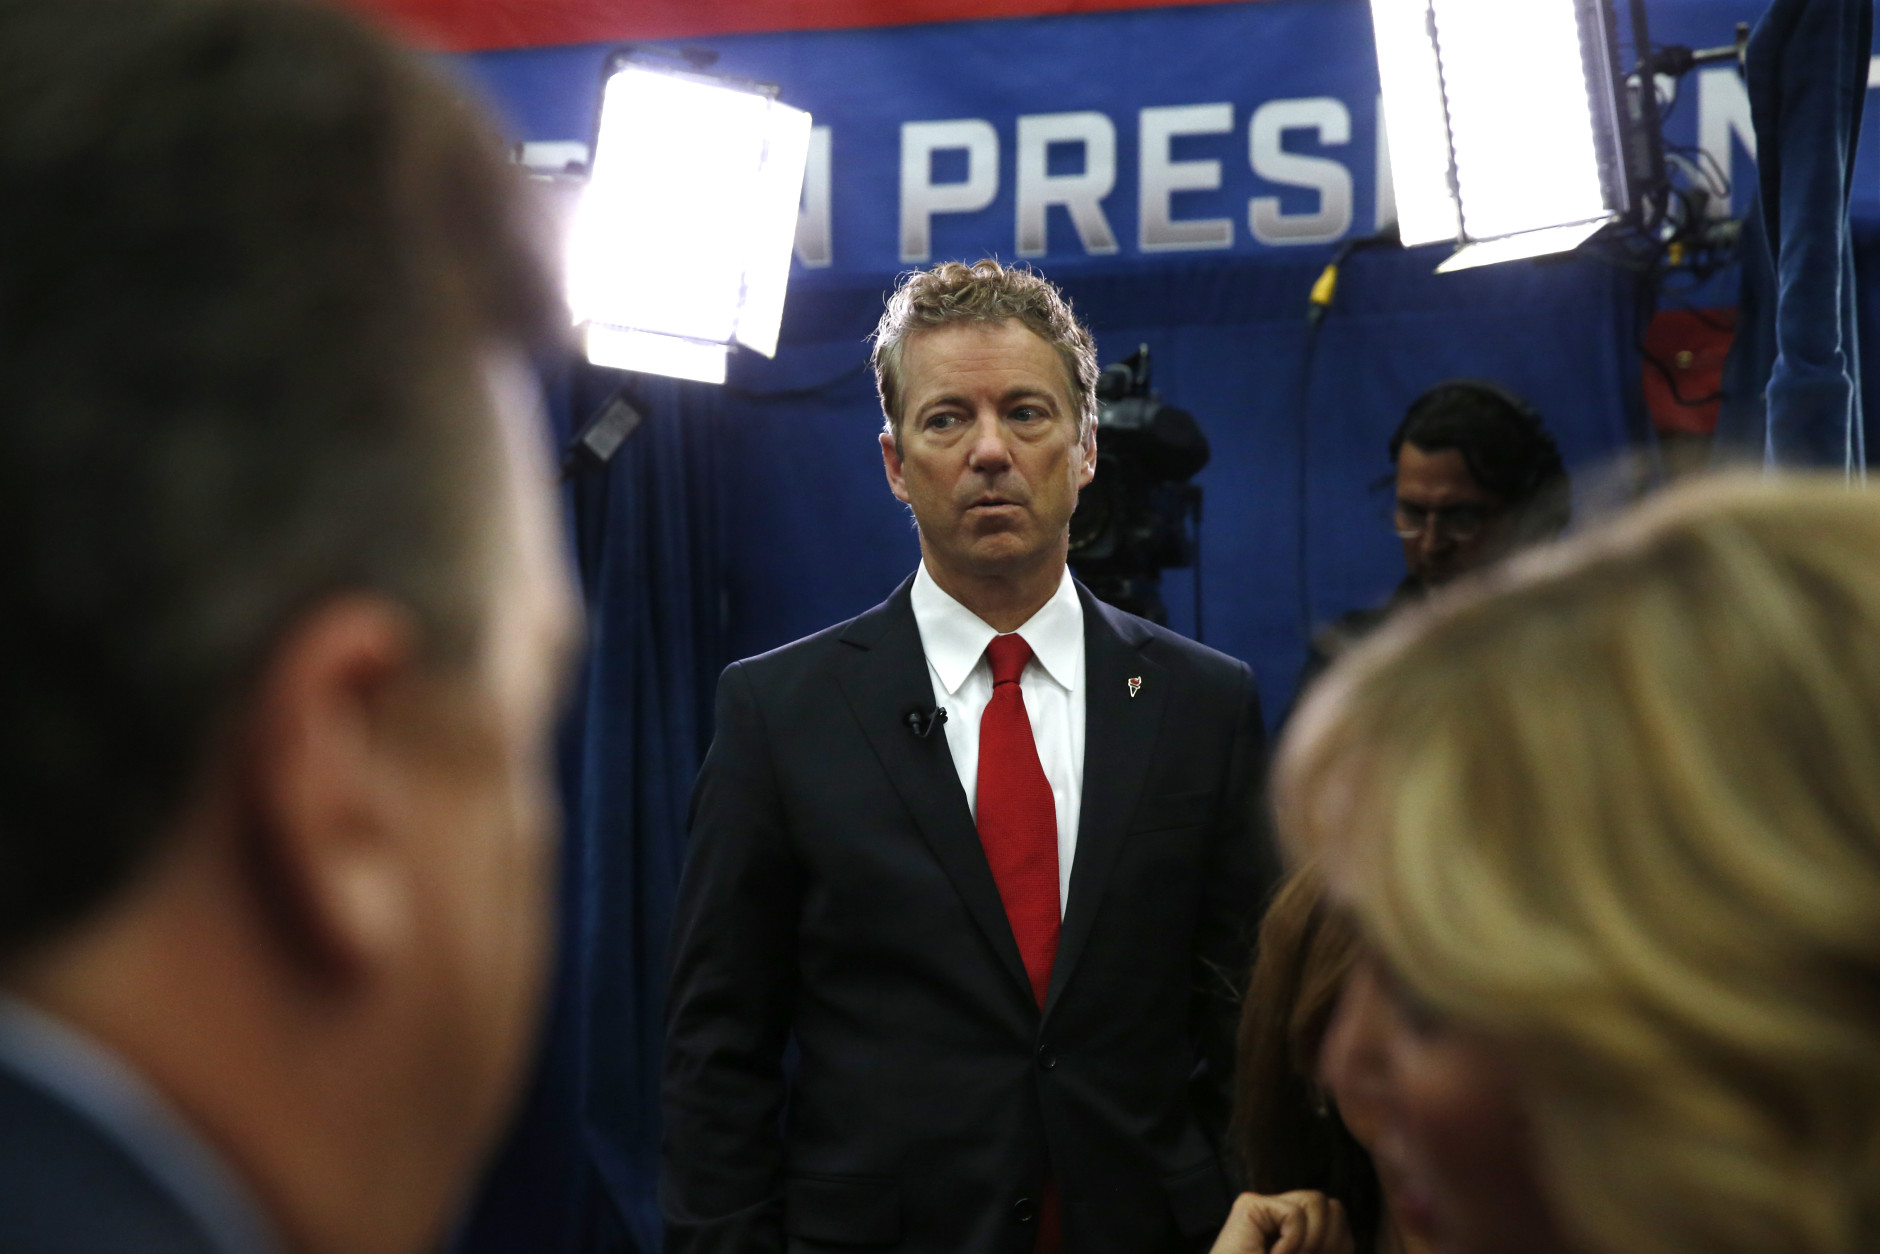 Rand Paul pauses after an interview in the spin room following the CNBC Republican presidential debate at the University of Colorado, Wednesday, Oct. 28, 2015, in Boulder, Colo. (AP Photo/Brennan Linsley)